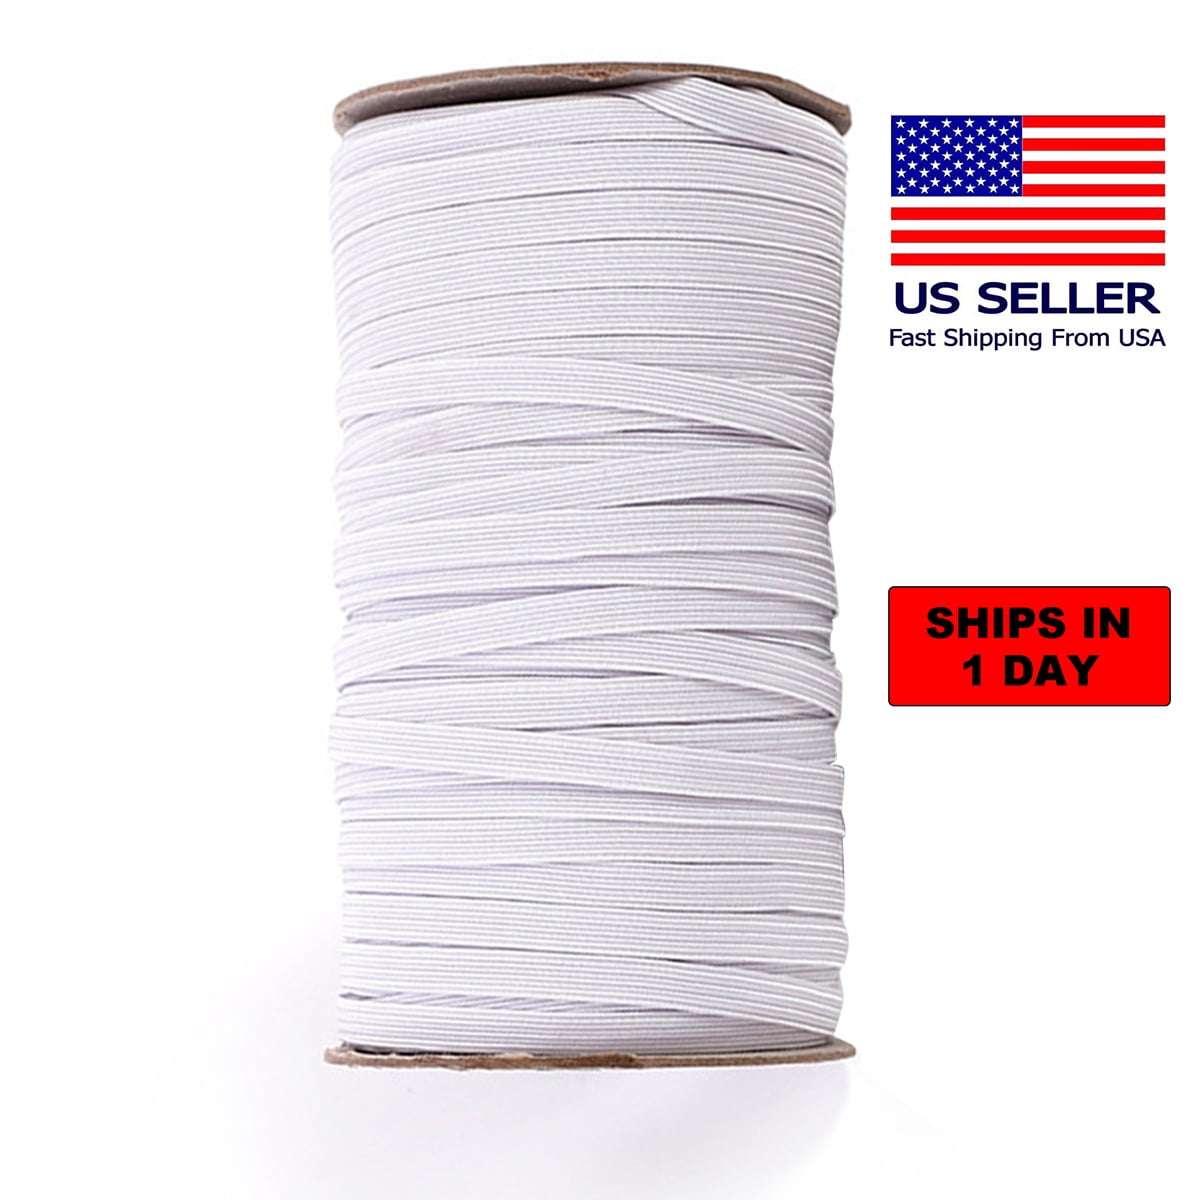 1/8 Inch,1/4 Inch Elastic Band Cord Sewing TrimFor DIY Mask Sewing 1-200Yards